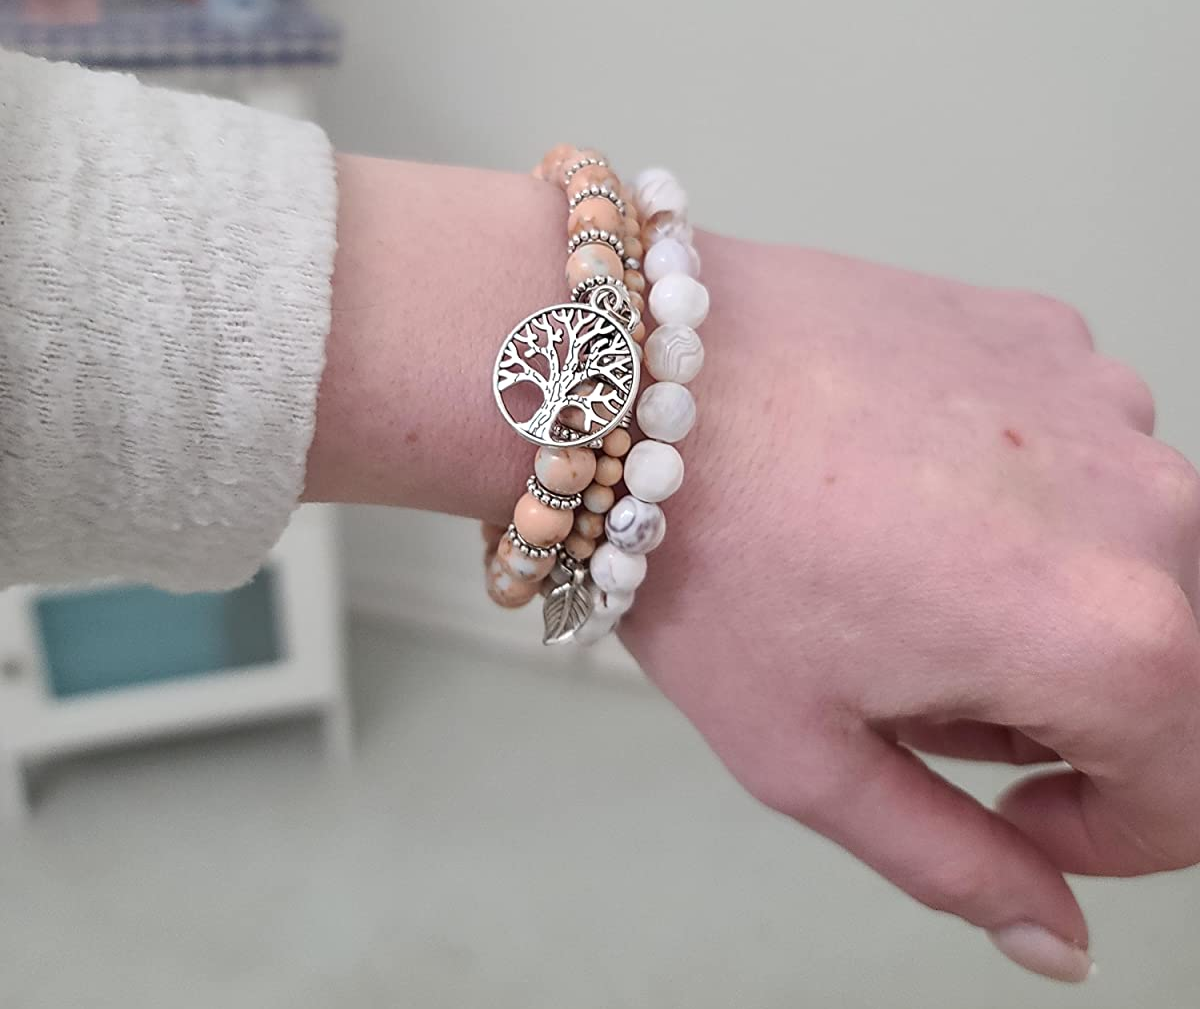 Reviewer wearing light pink and white marble patterned beads with a tree of life charm and leaf charm